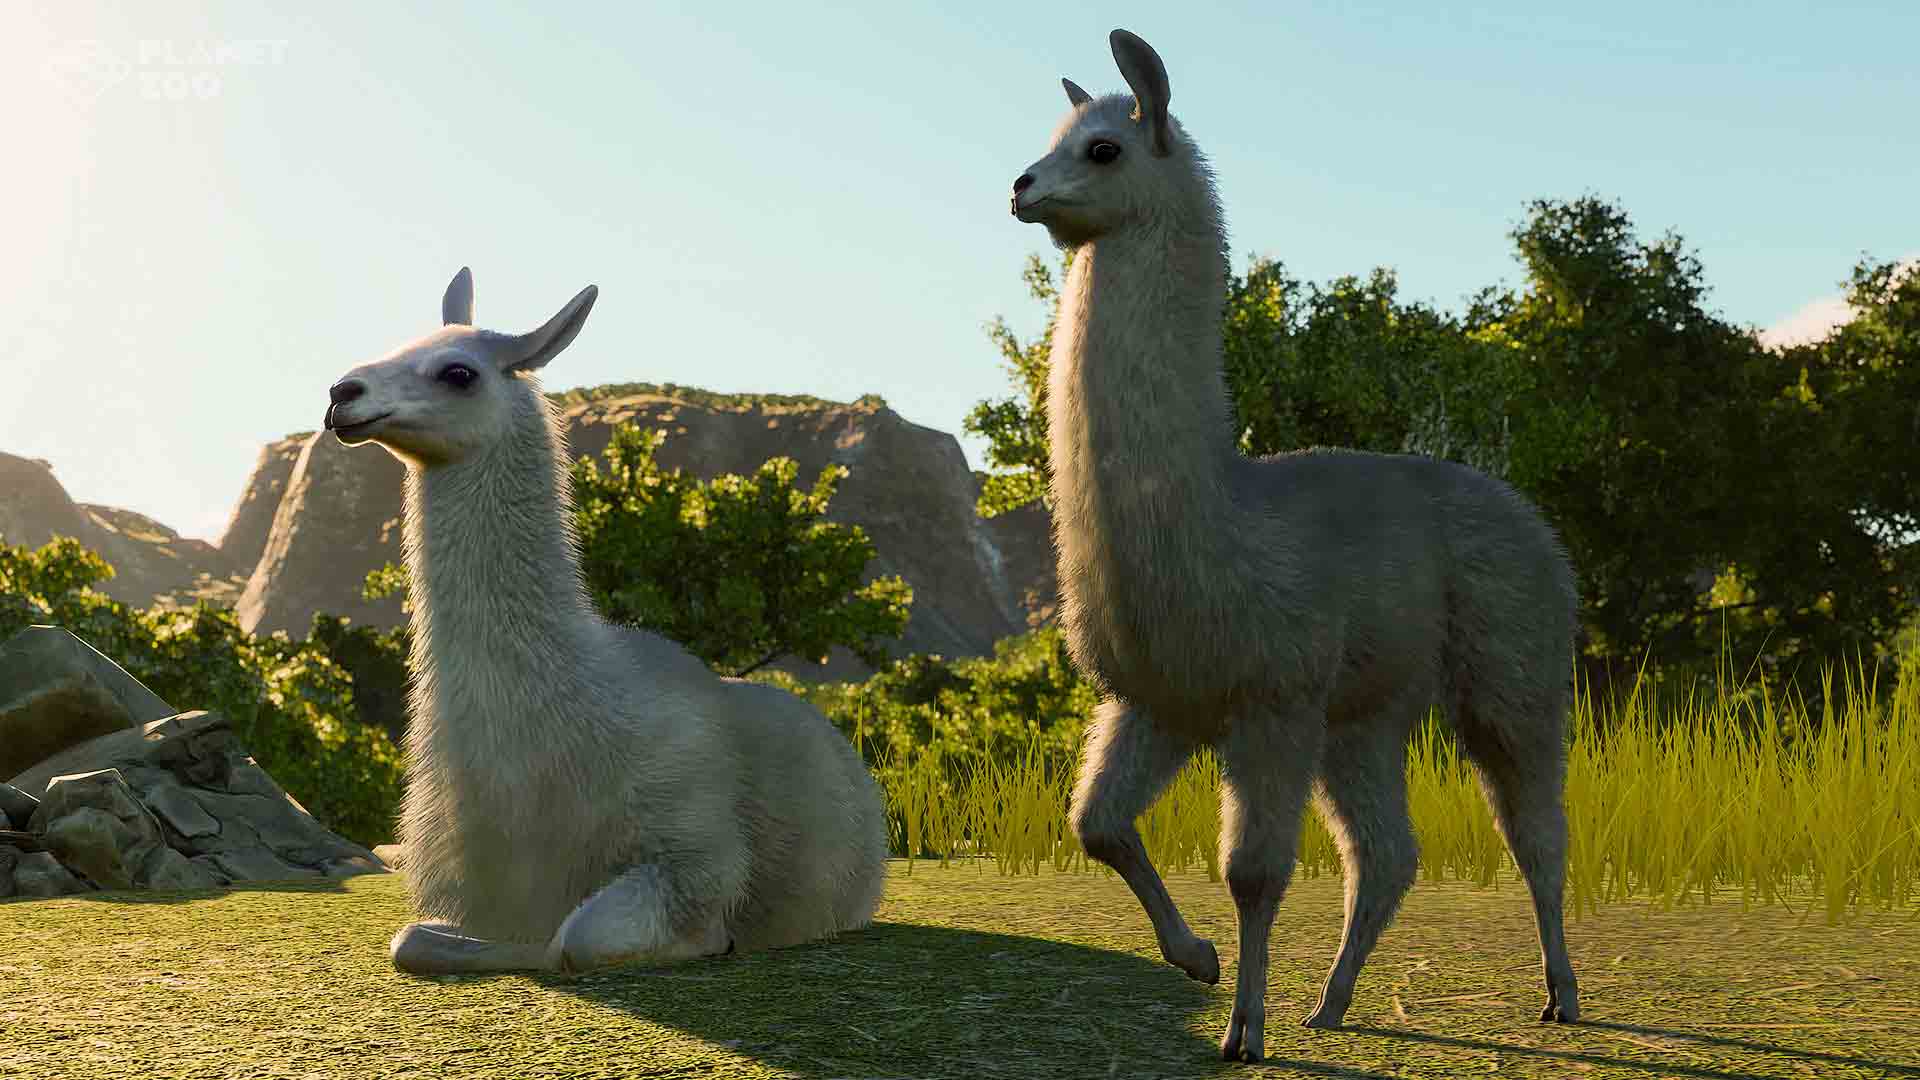 download planet zoo zoopedia for free